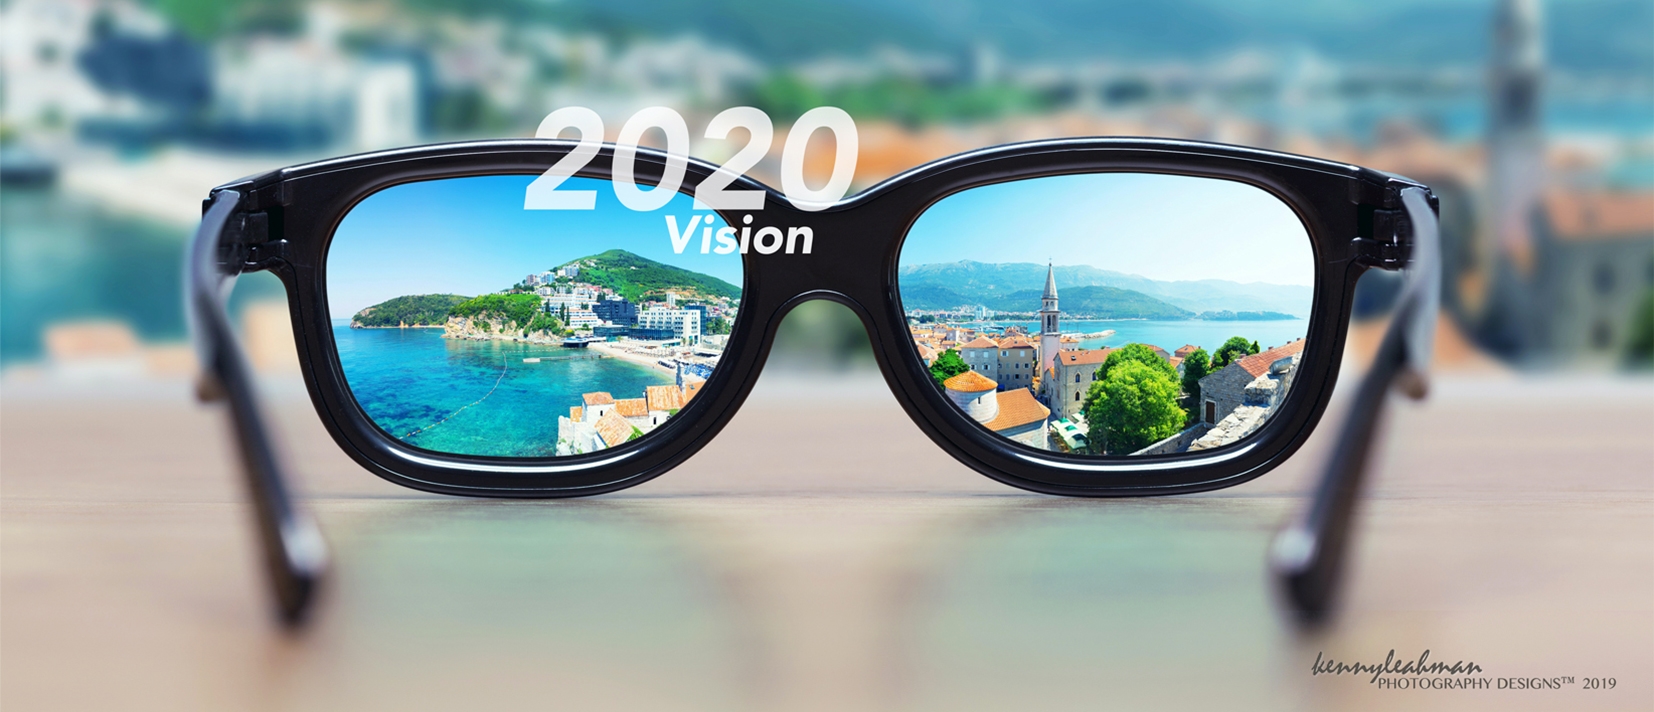 How’s Your 2020 Vision?